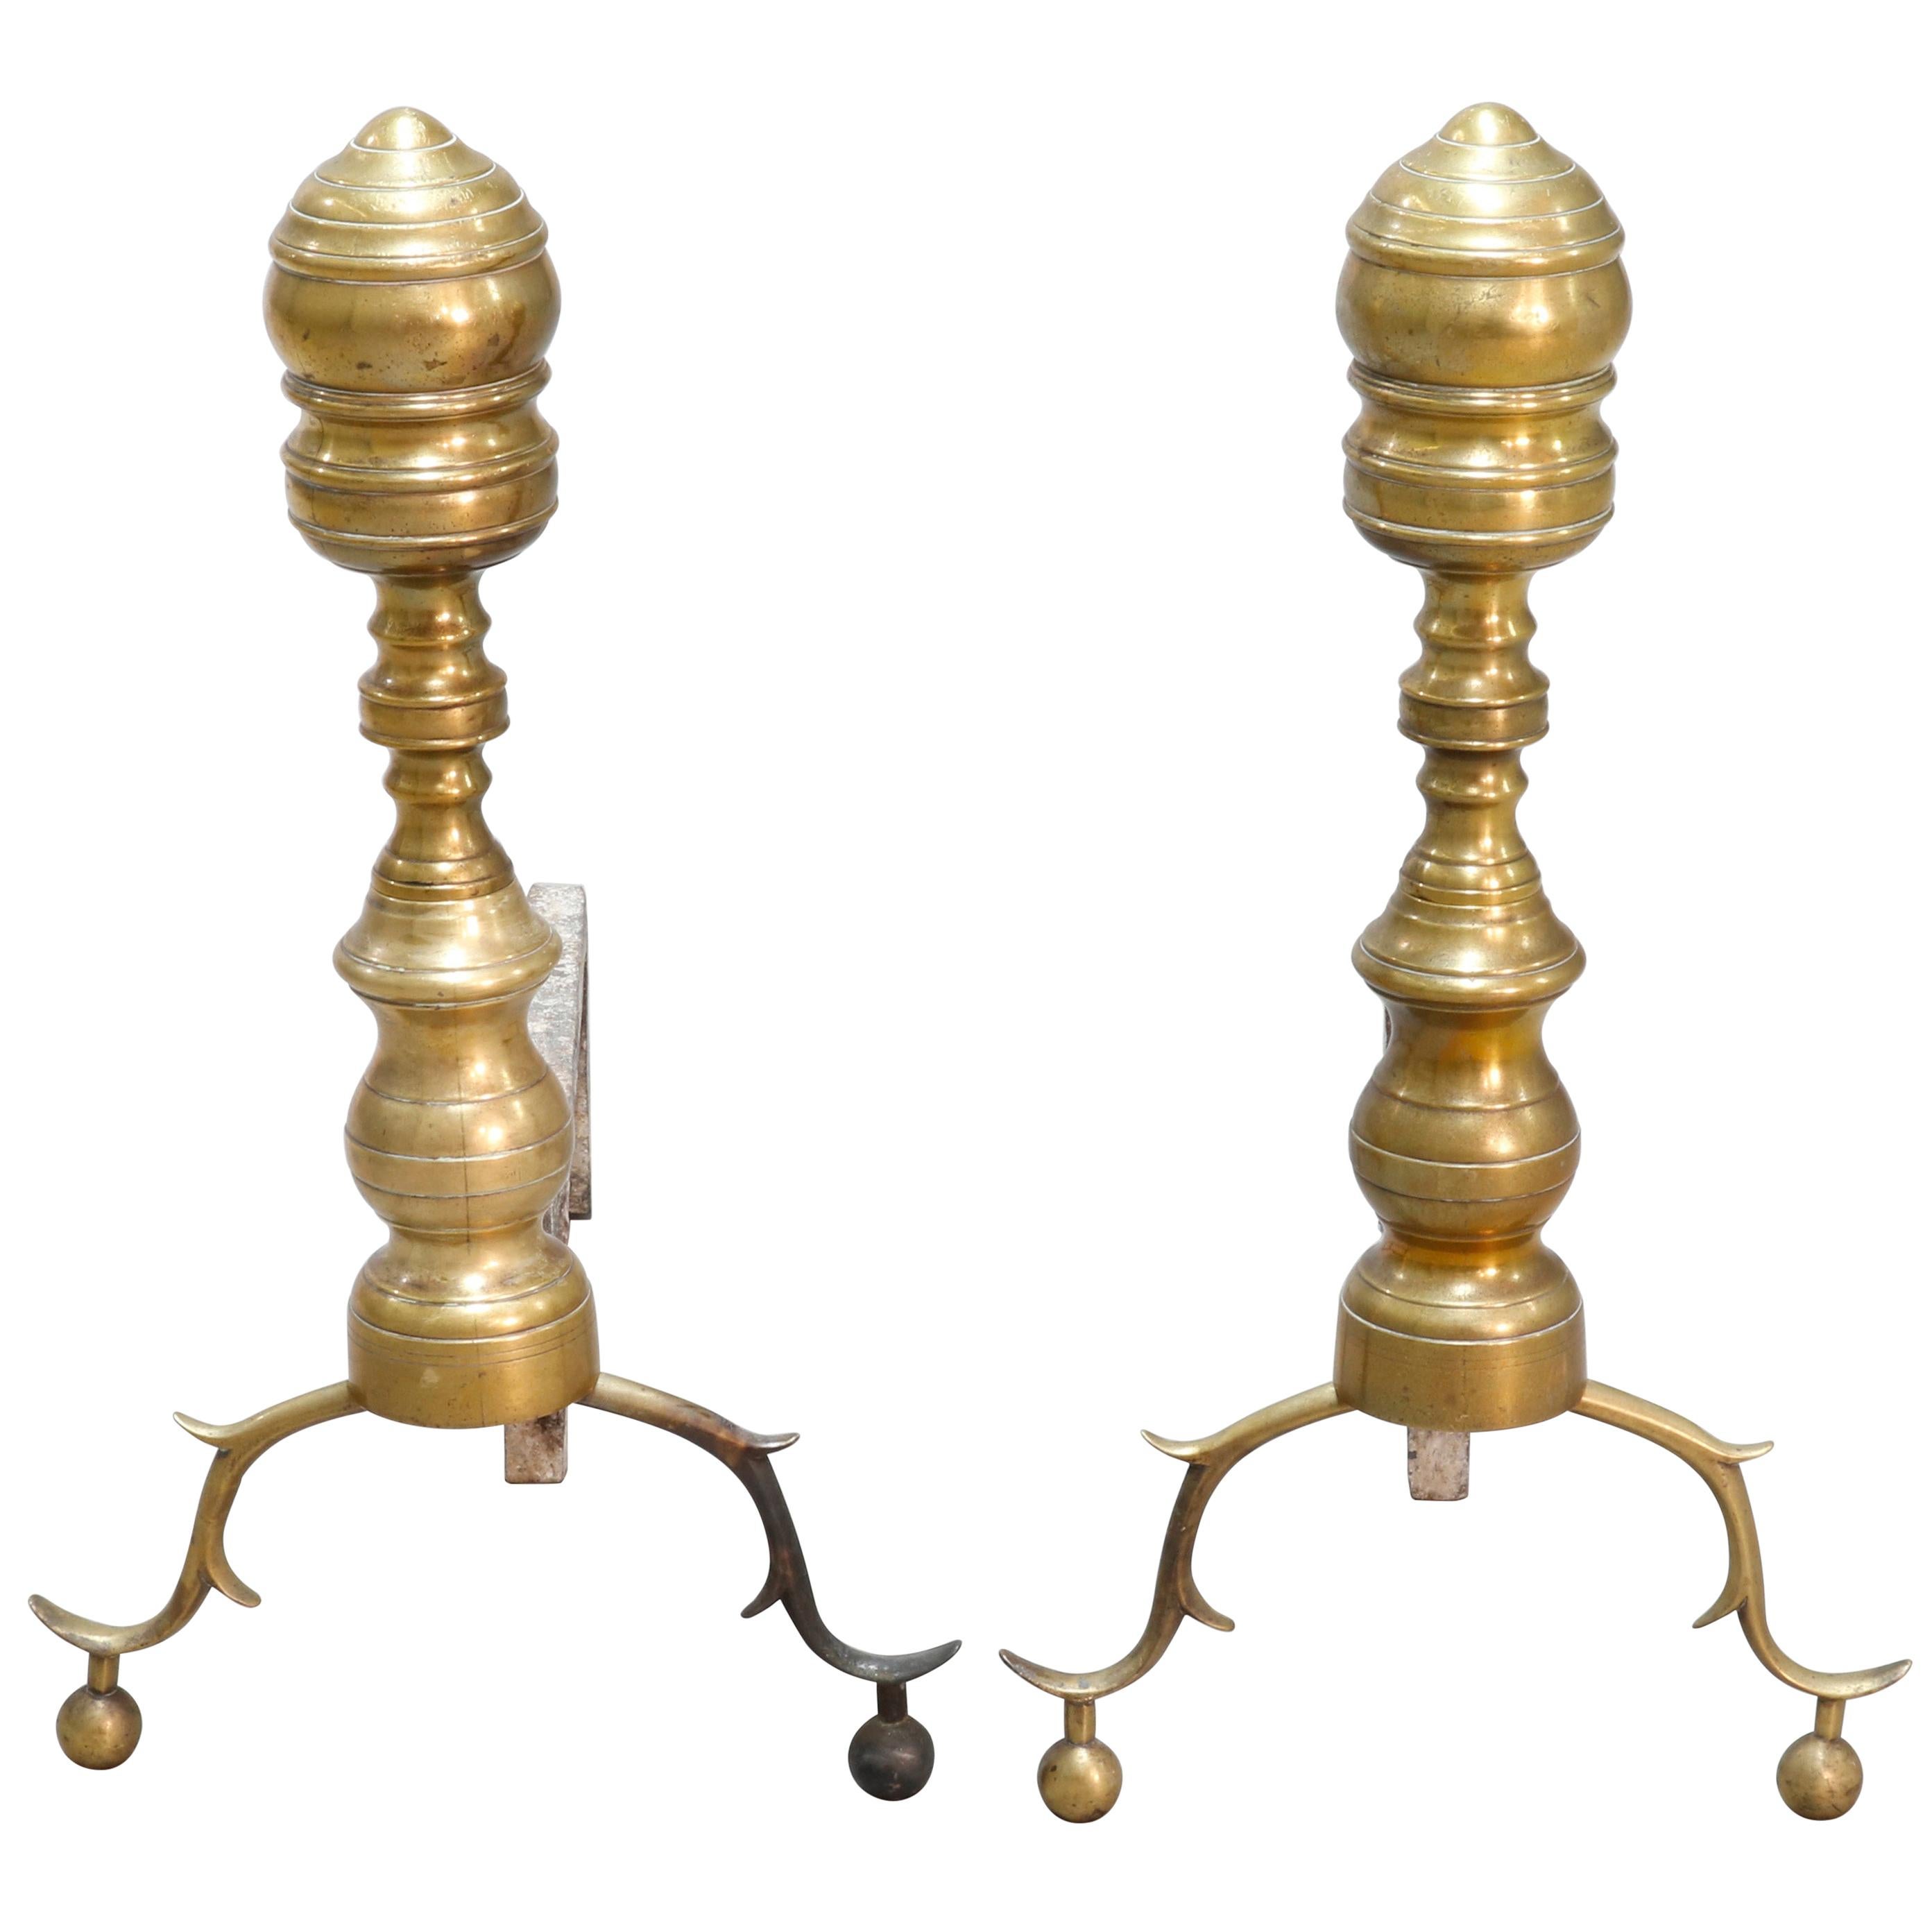 Antique Early British Colonial Brass Hand Forged Beehive Andirons, circa 1800